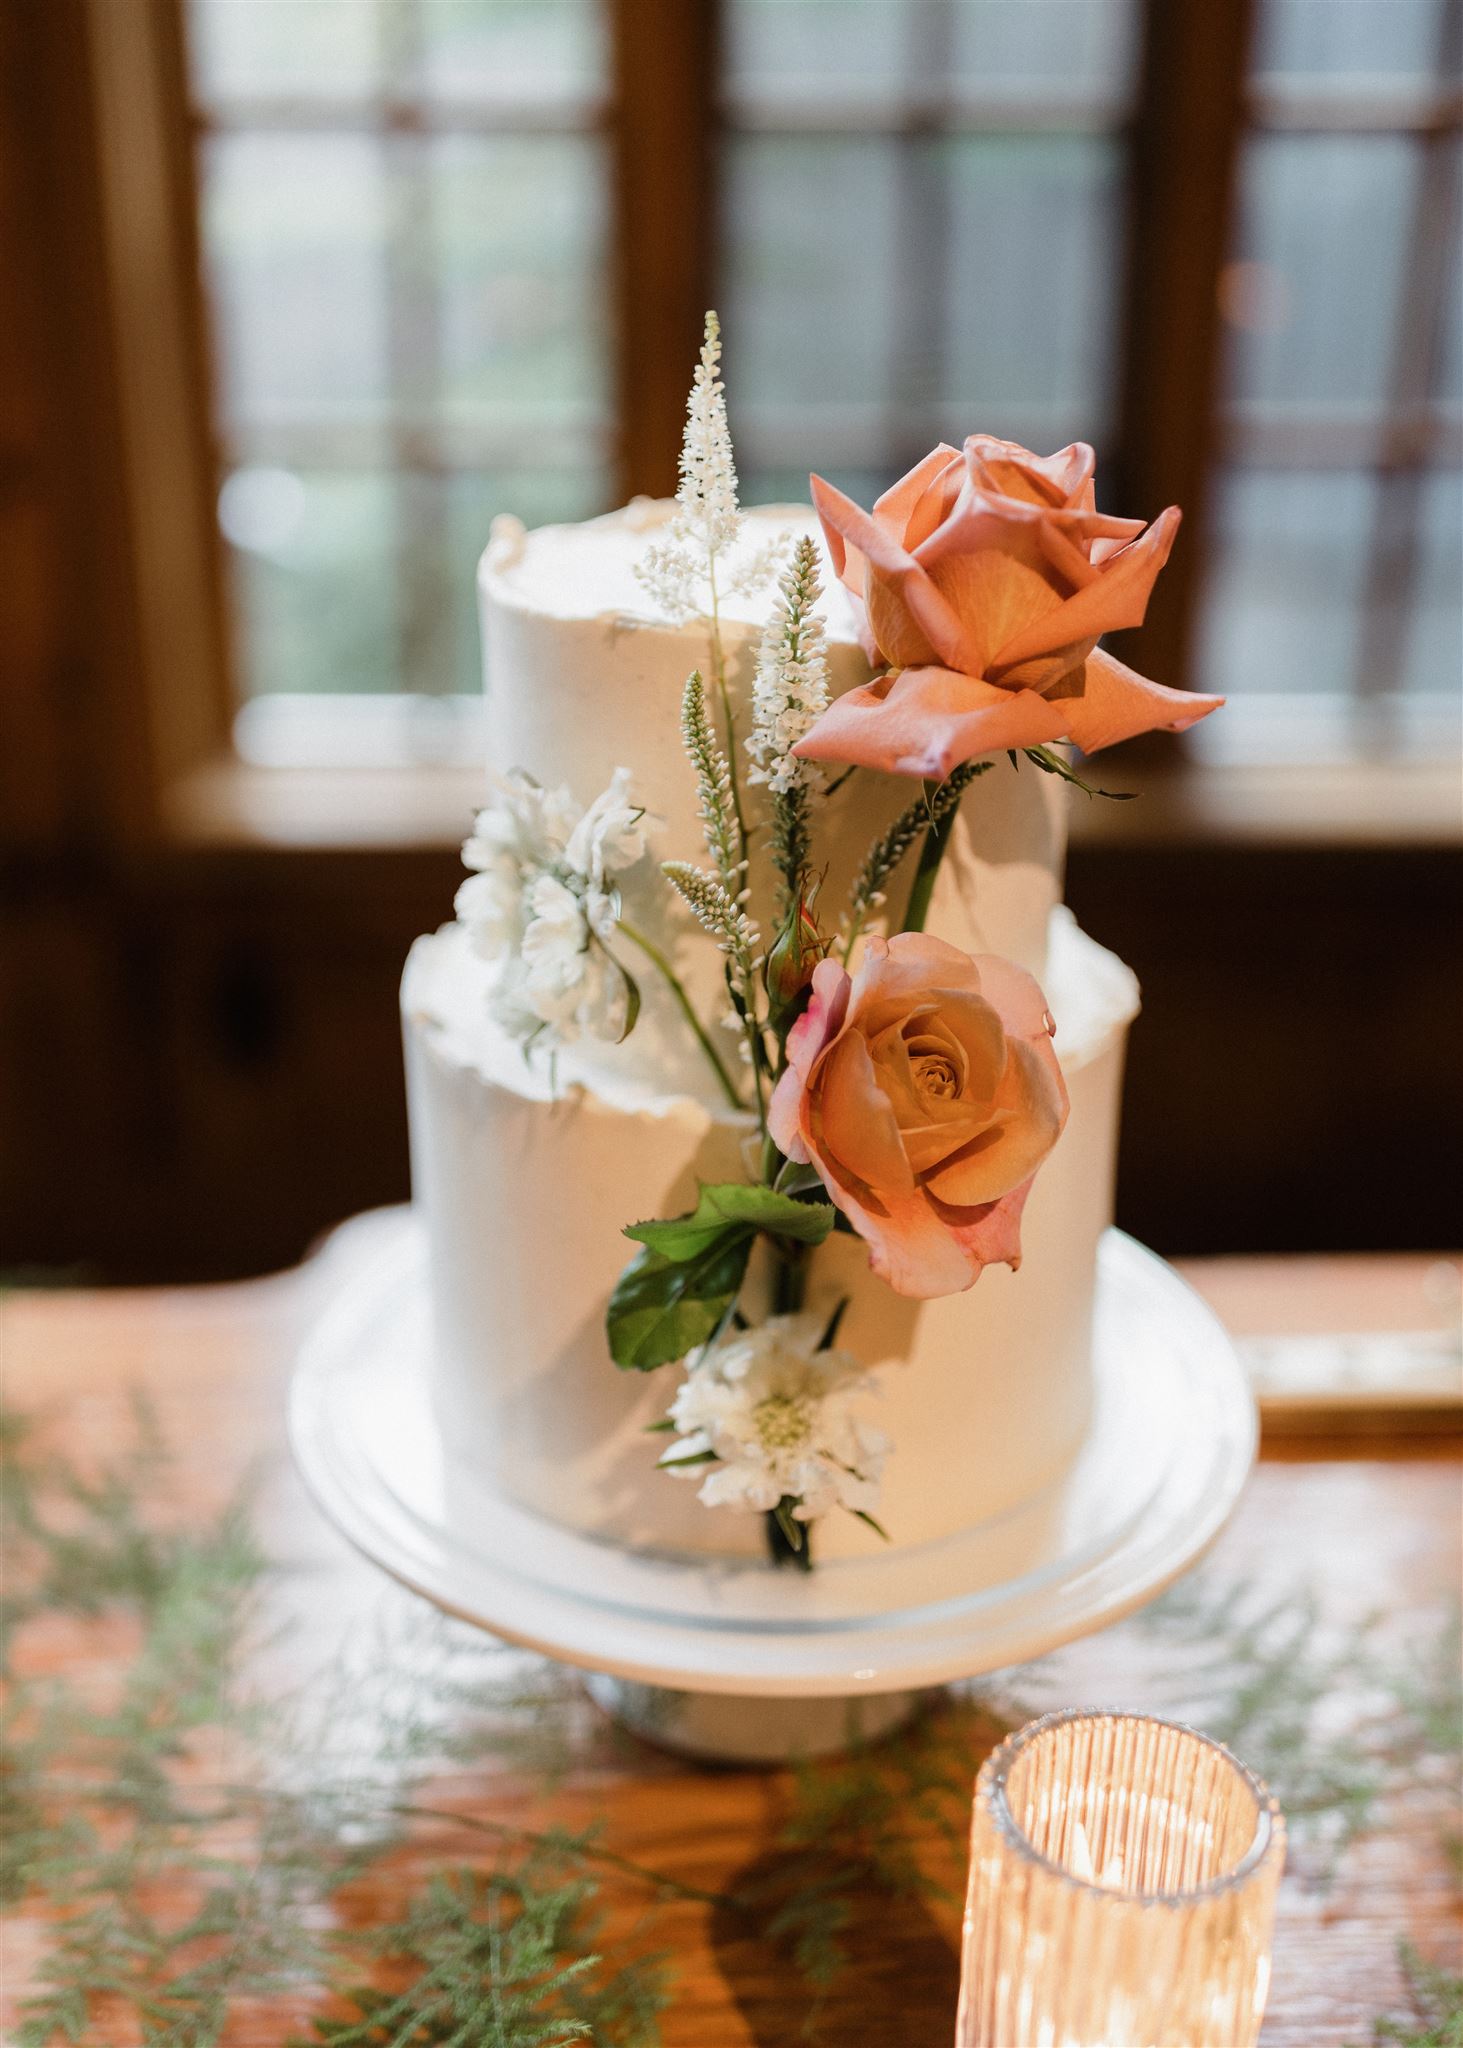 Spring wedding cake with fresh pink roses - Crumb Cakery